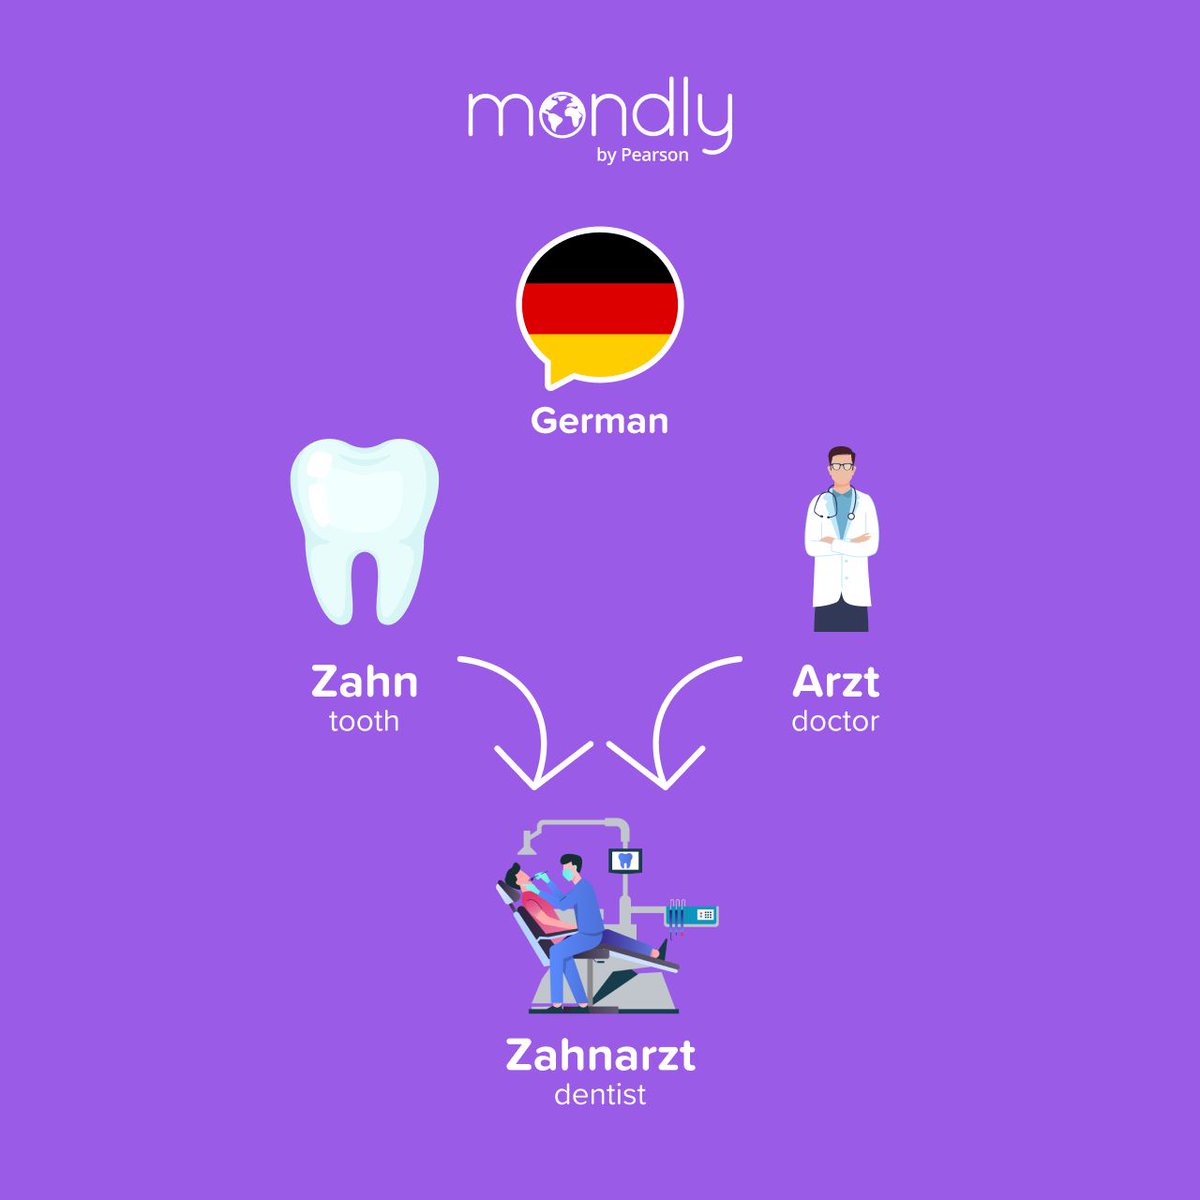 Learning German made easy. ✅ What compound words do you know? 🤔
#learnGerman